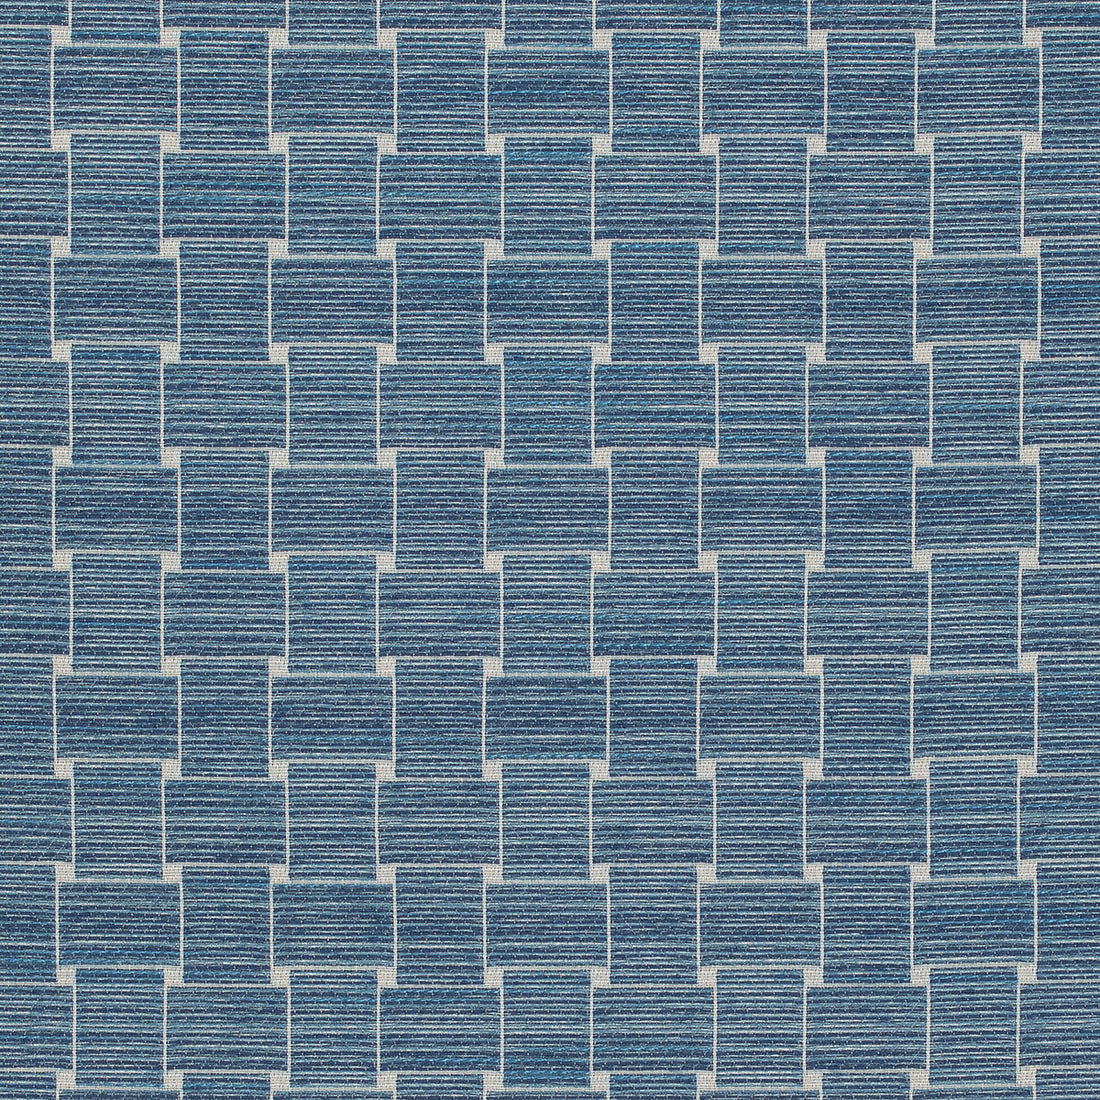 Beaumois Woven fabric in blue color - pattern 8020108.5.0 - by Brunschwig &amp; Fils in the Granville Weaves collection